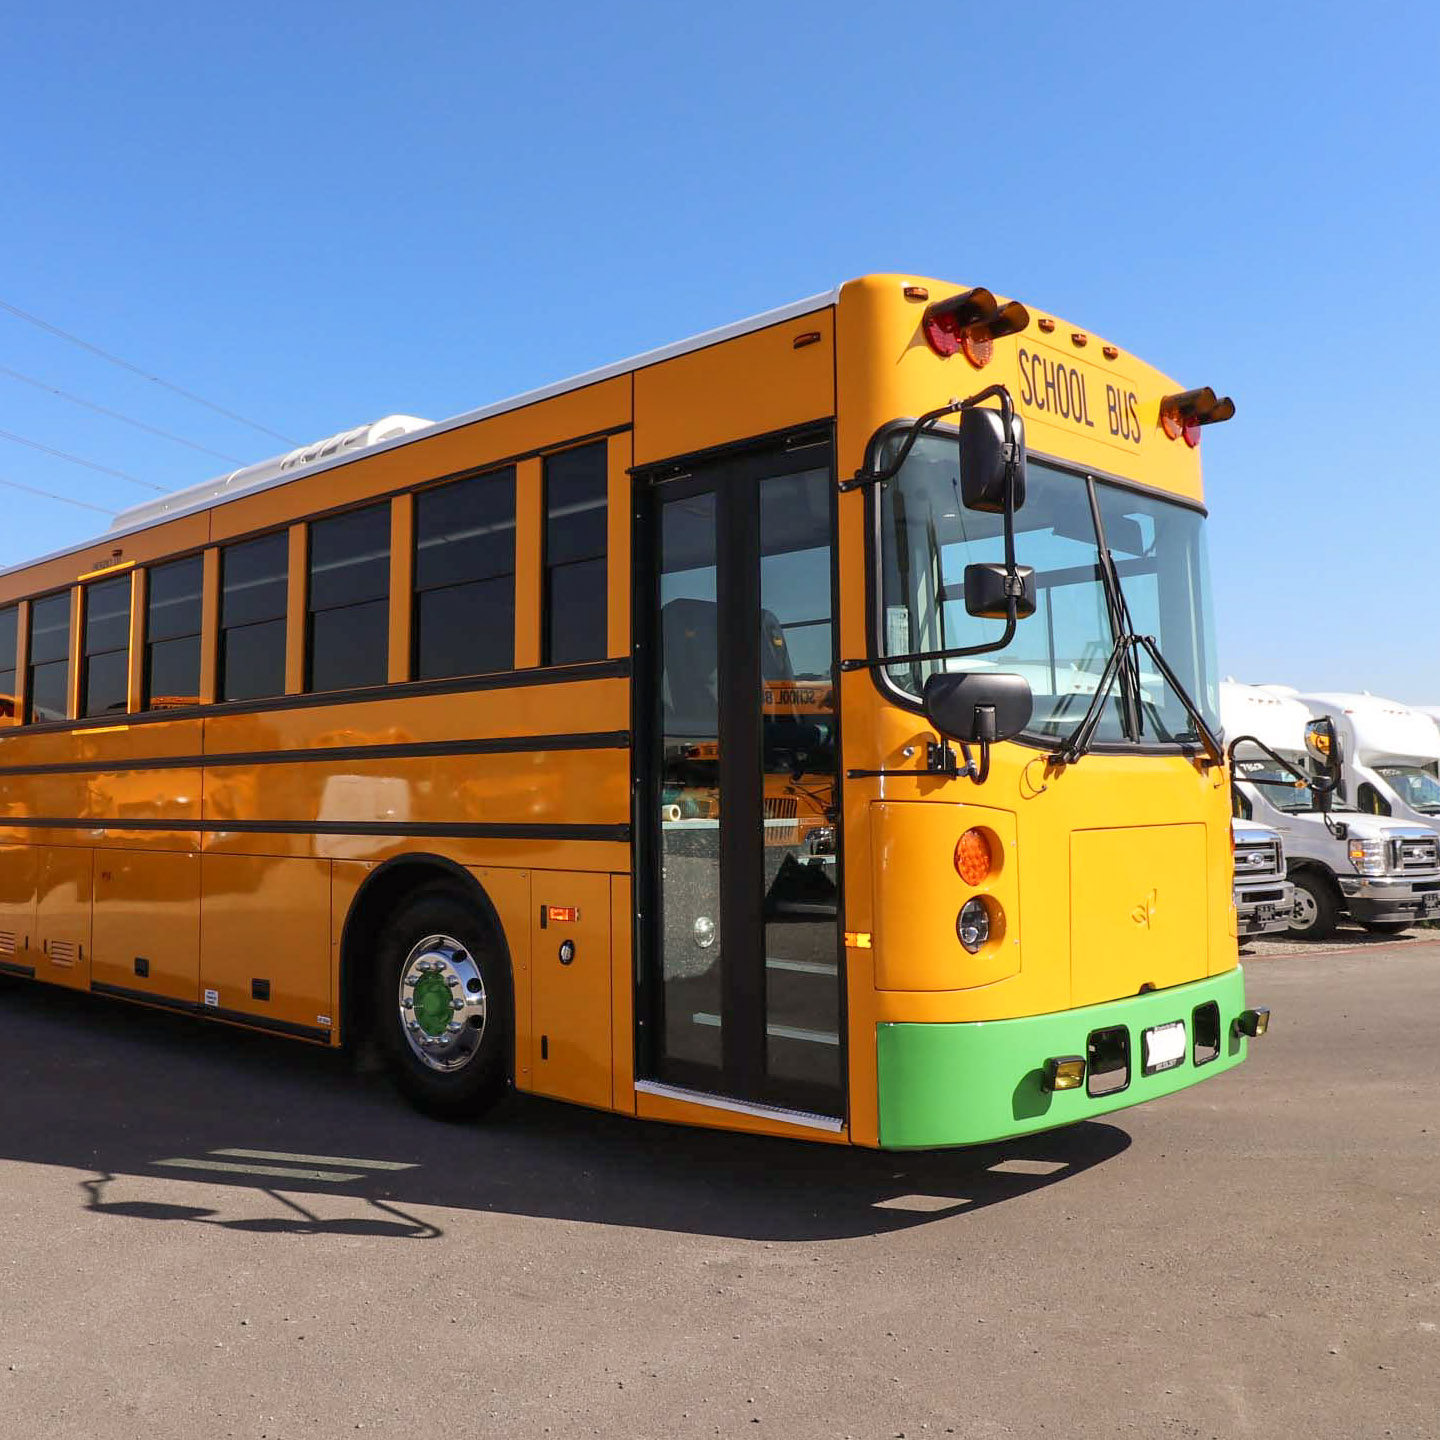 A yellow greenpower school bus parked in a parking lot.